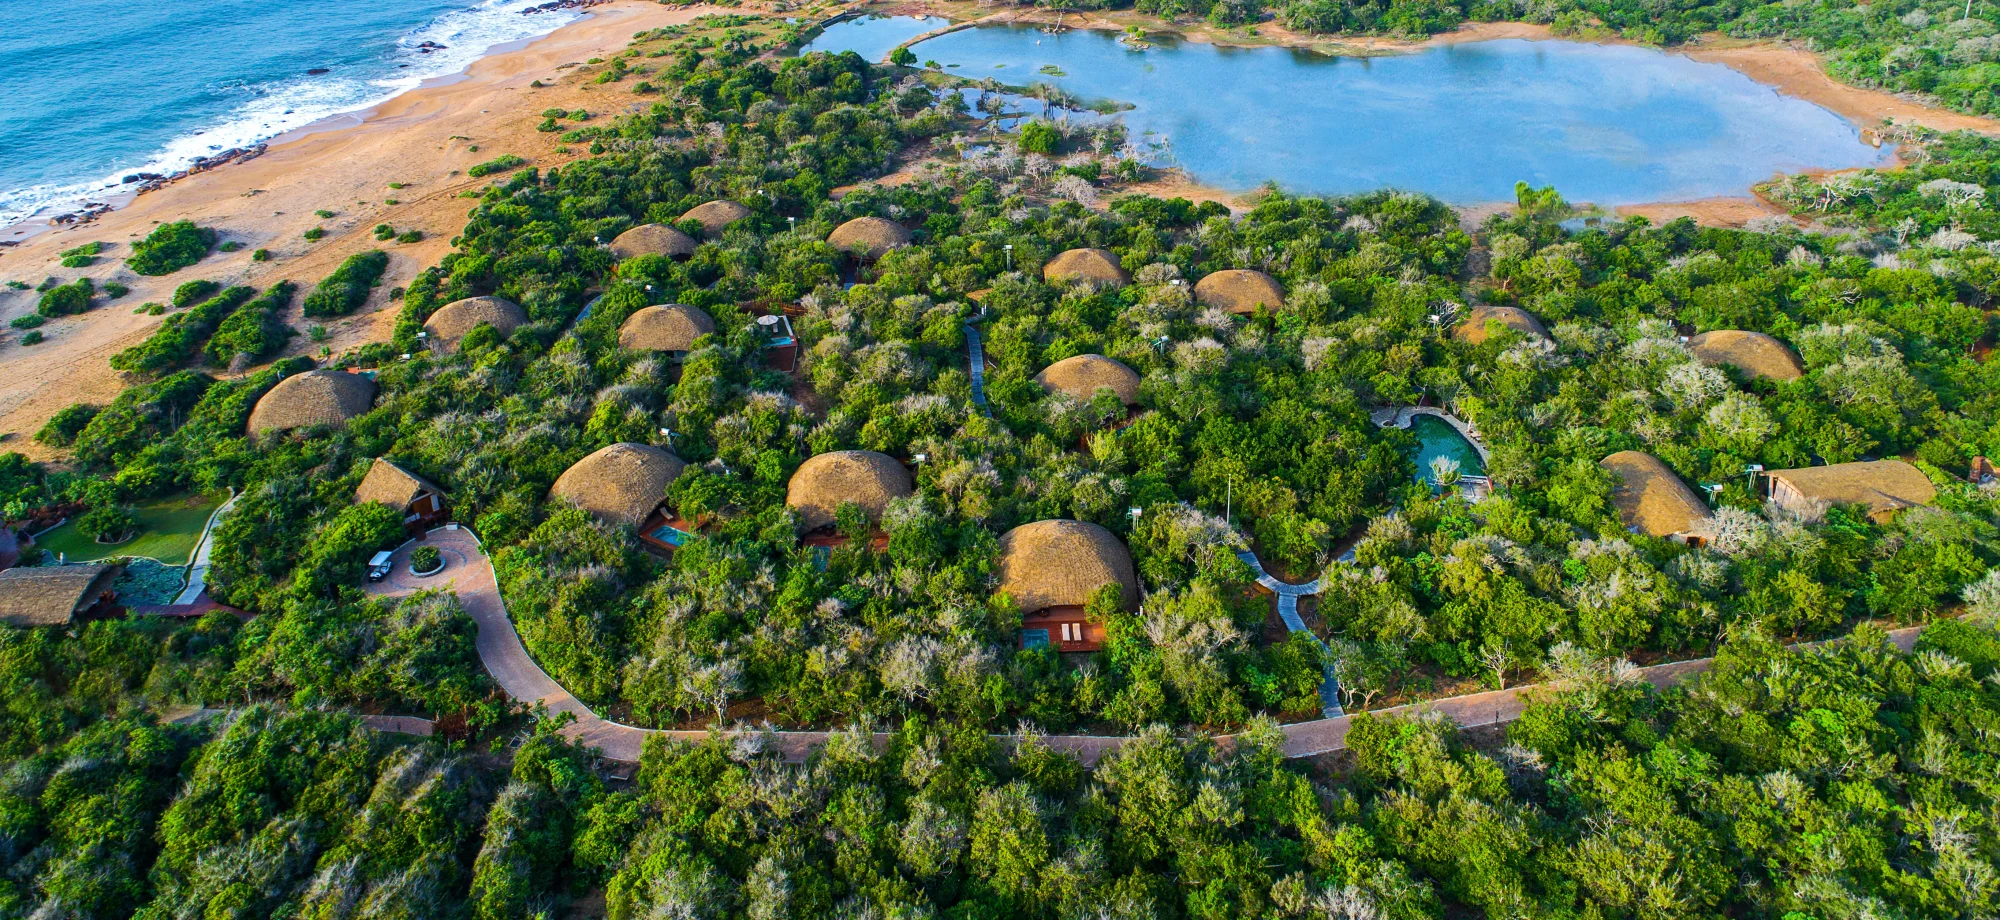 Chena Huts is comprised of thatched cottages surrounded by greenery and the ocean. 